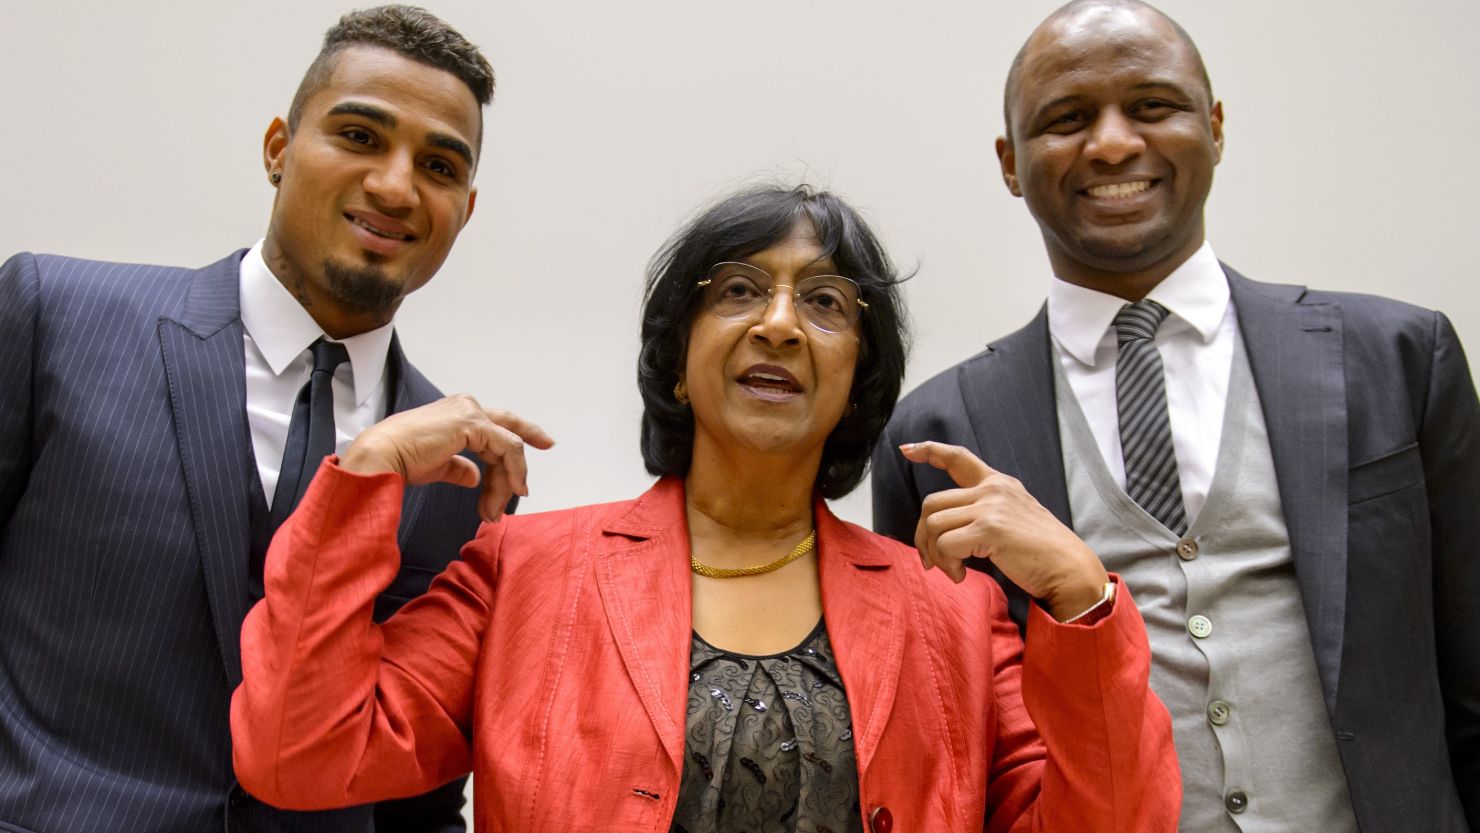 Kevin-Prince Boateng (L) and Patrick Vieira (R) with United Nations High Commissioner for Human Rights Navi Pillay